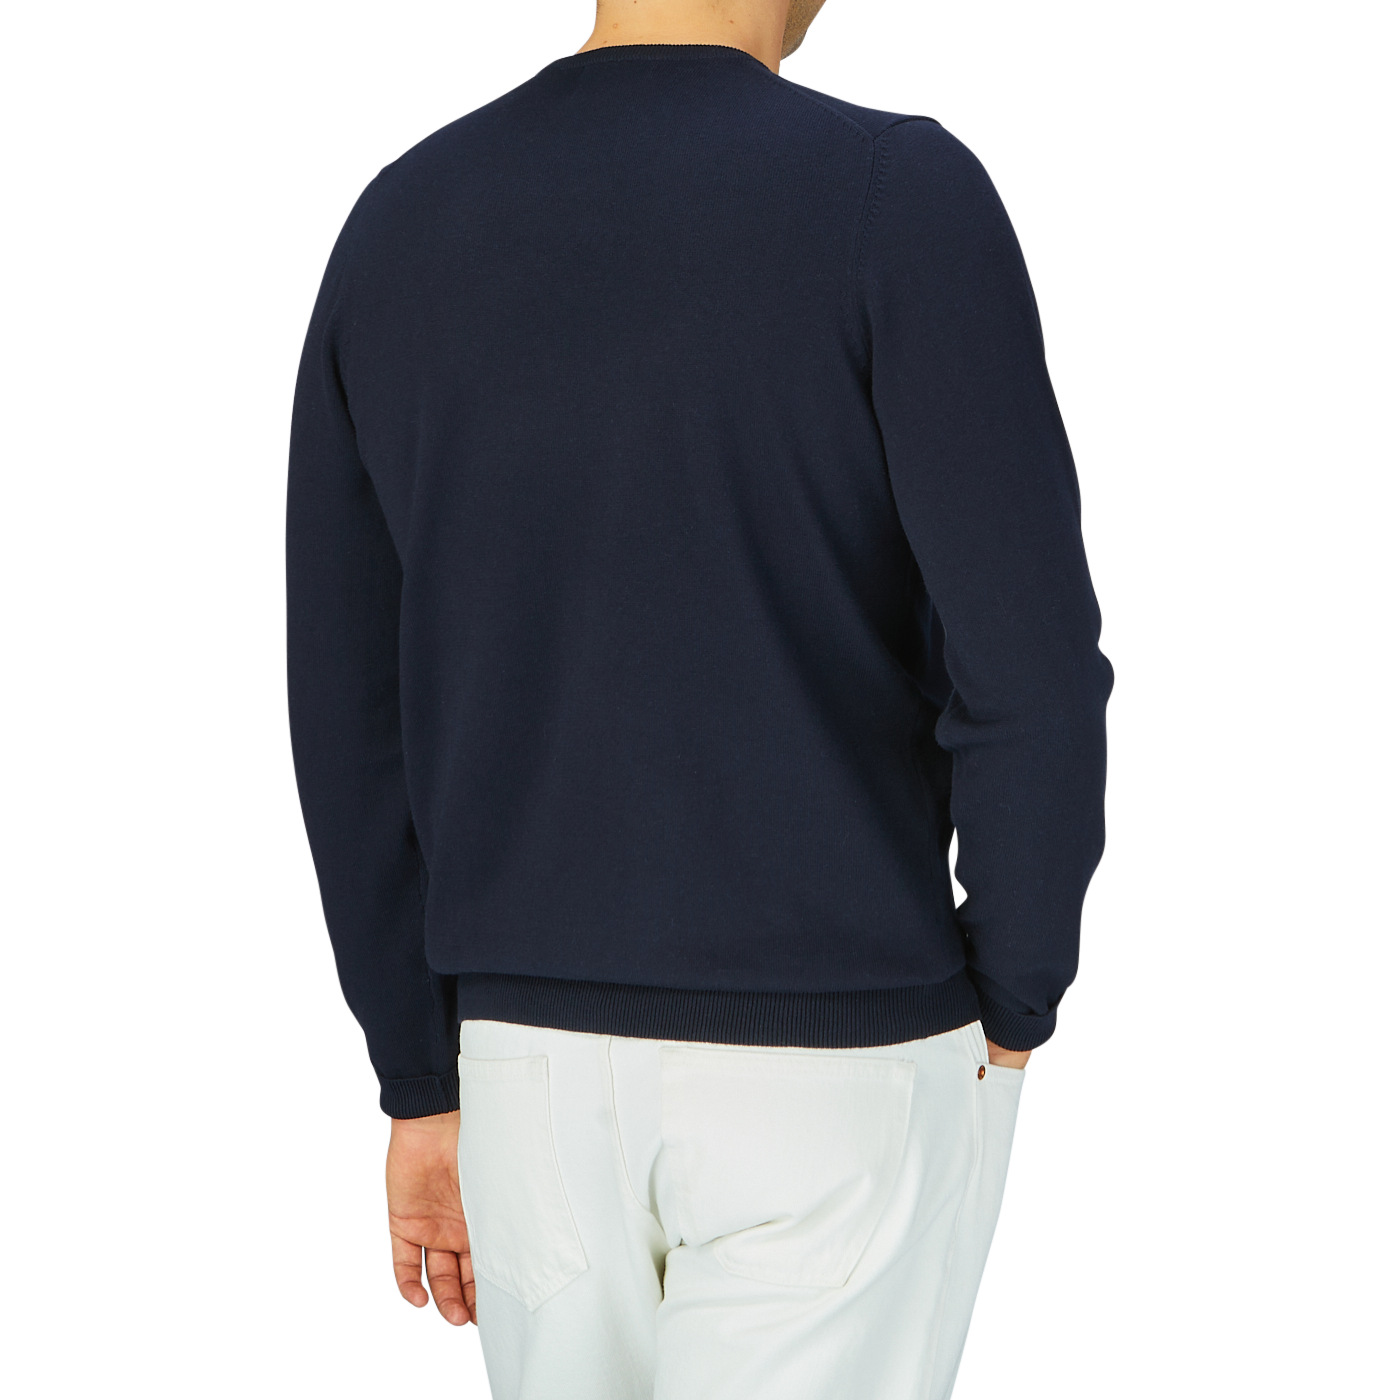 Man wearing an Alan Paine navy blue luxury cotton crewneck sweater and white pants, viewed from behind.